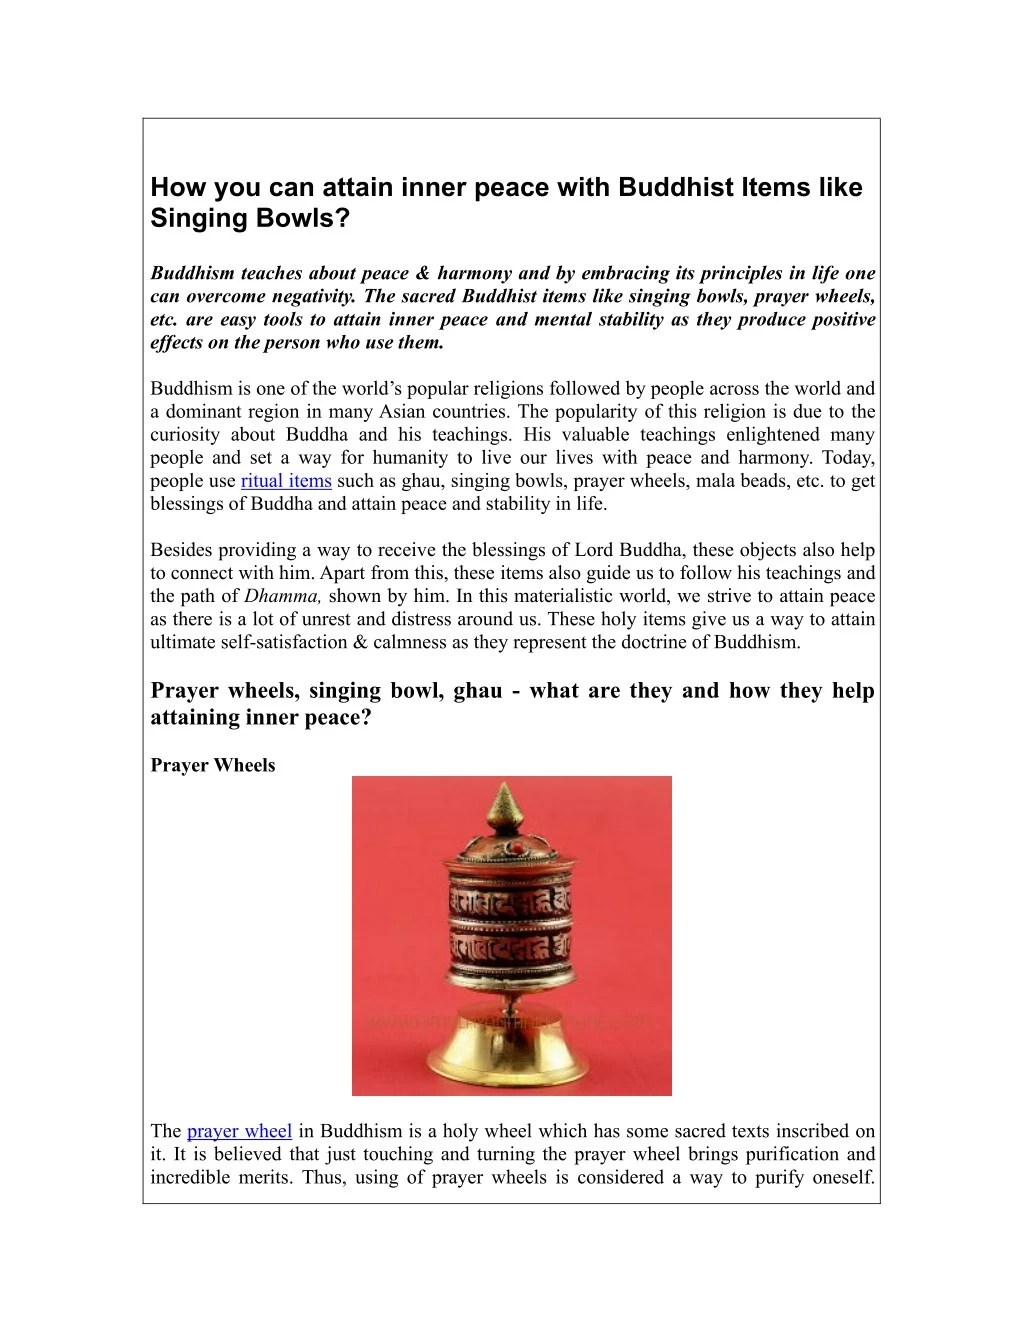 how you can attain inner peace with buddhist